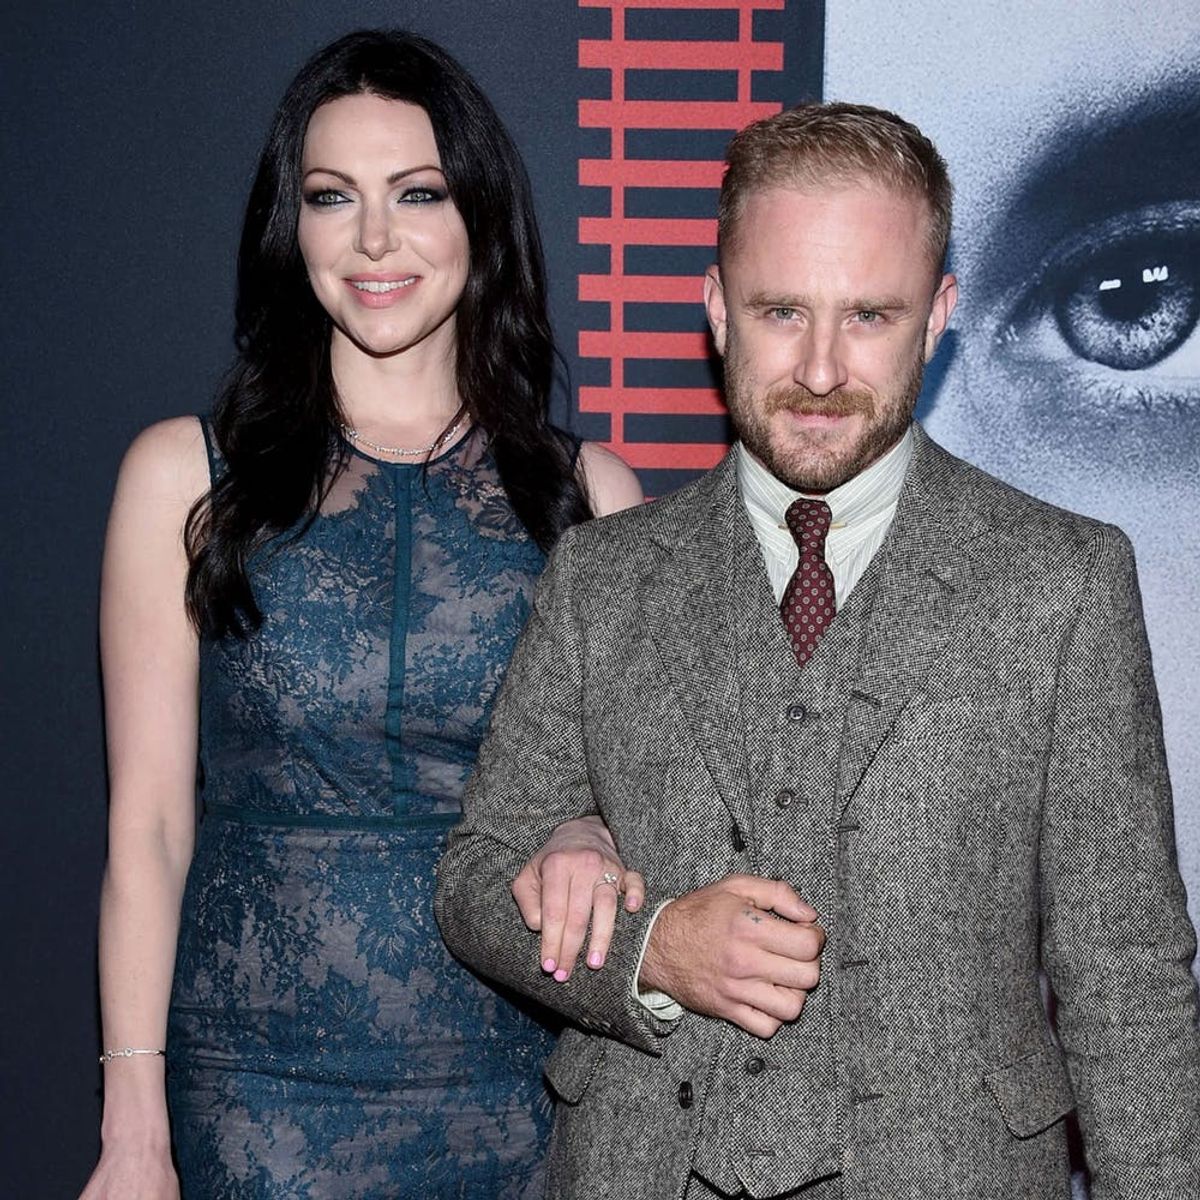 Laura Prepon and Fiancé Ben Foster Have Reportedly Welcomed a Baby Girl